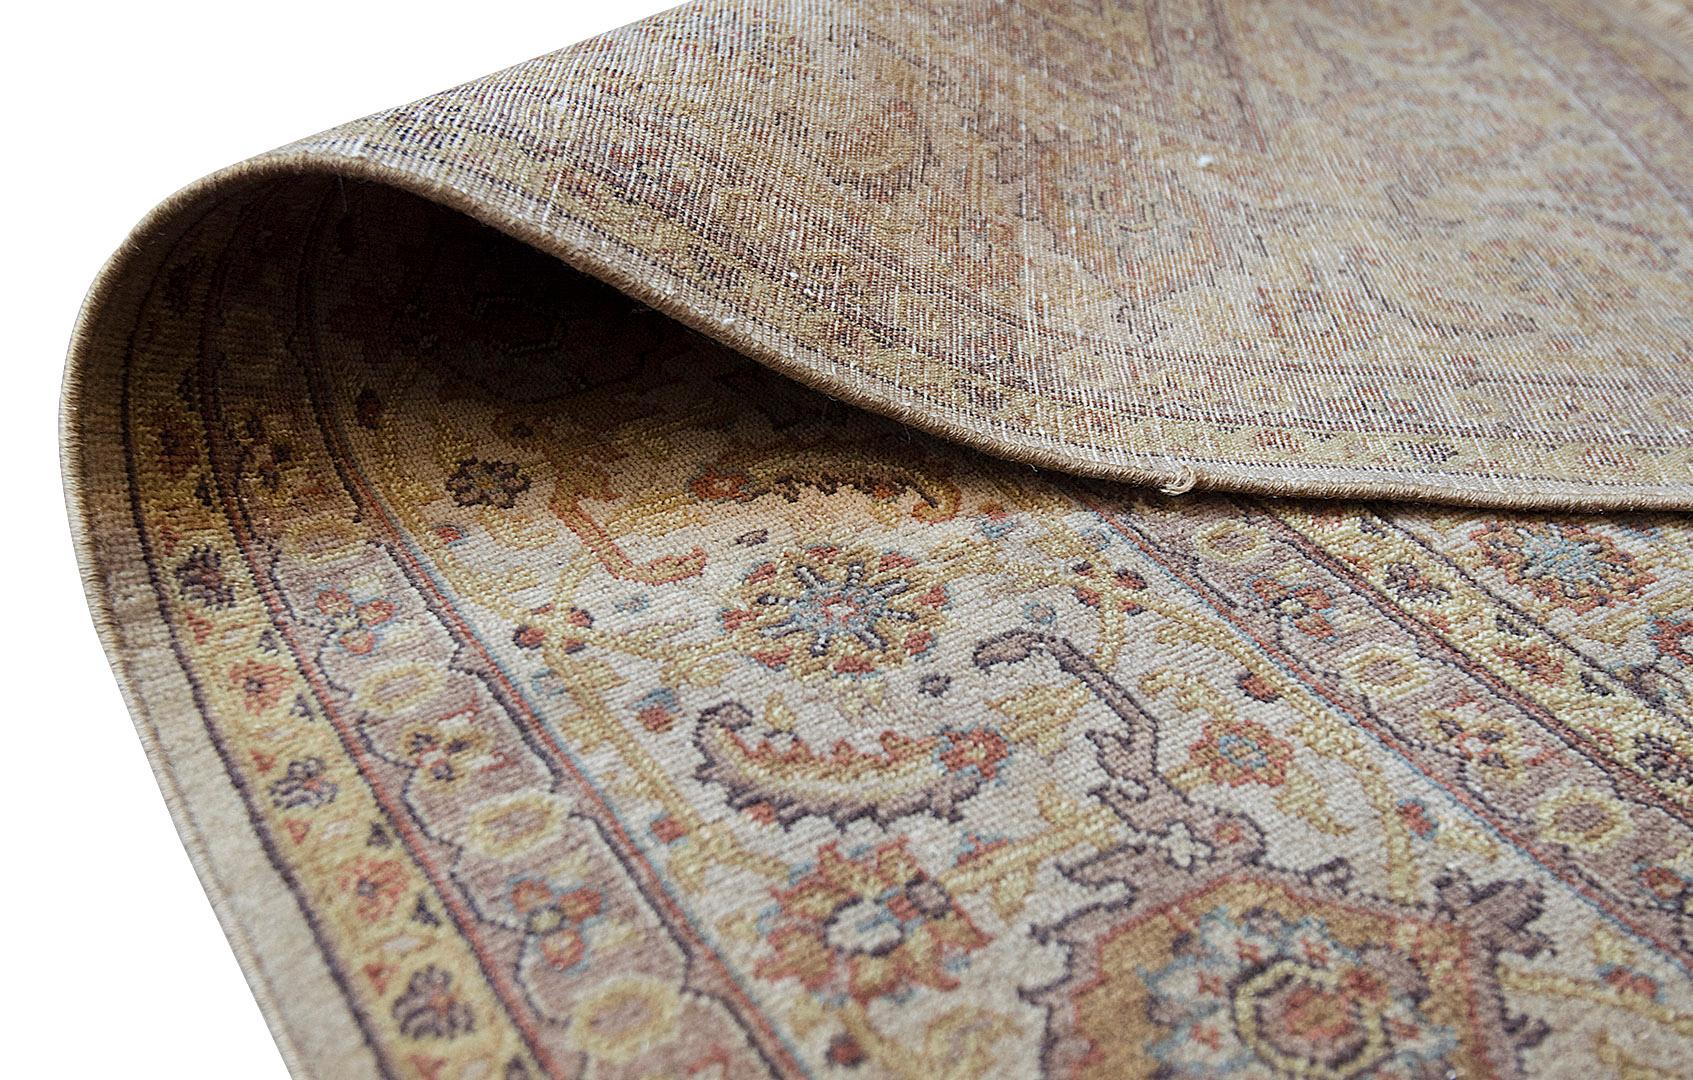 A beautiful classic Tabriz created in Kashmir featuring a masterful color combination and an extremely fine detailed workmanship. 100% natural wool pile. Brand new.